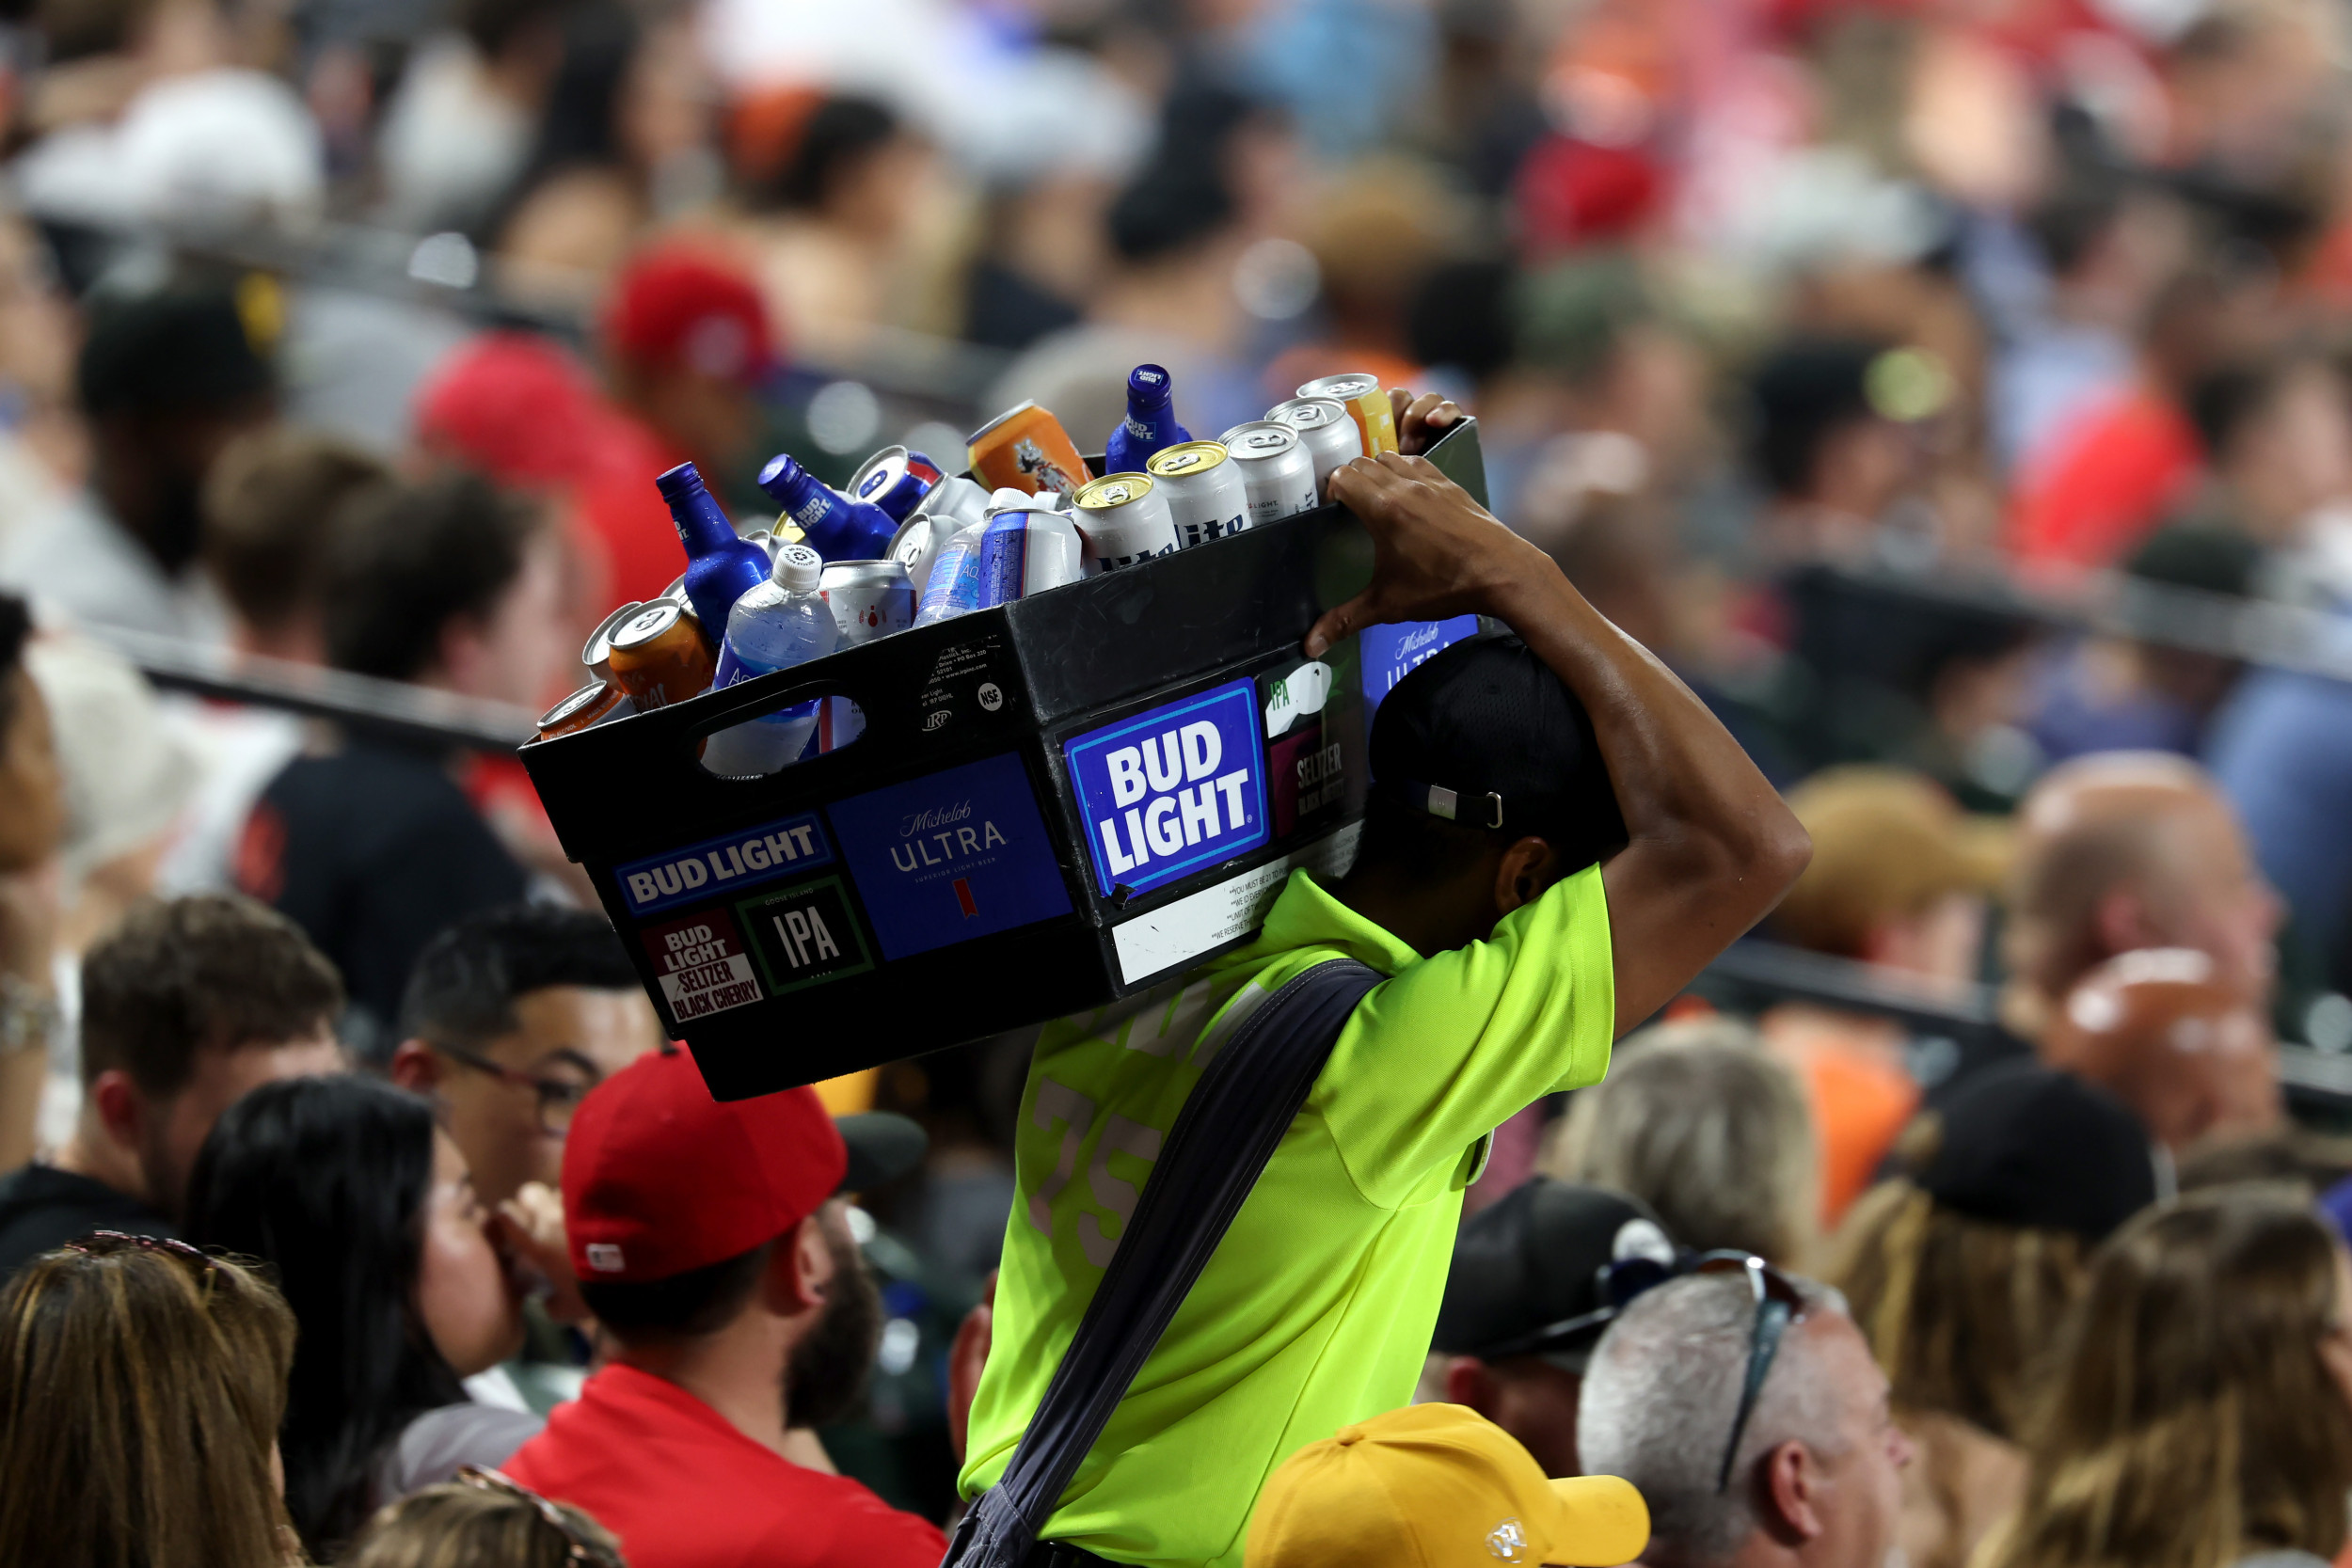 Bud Light Sales Suffer Before Fourth of July